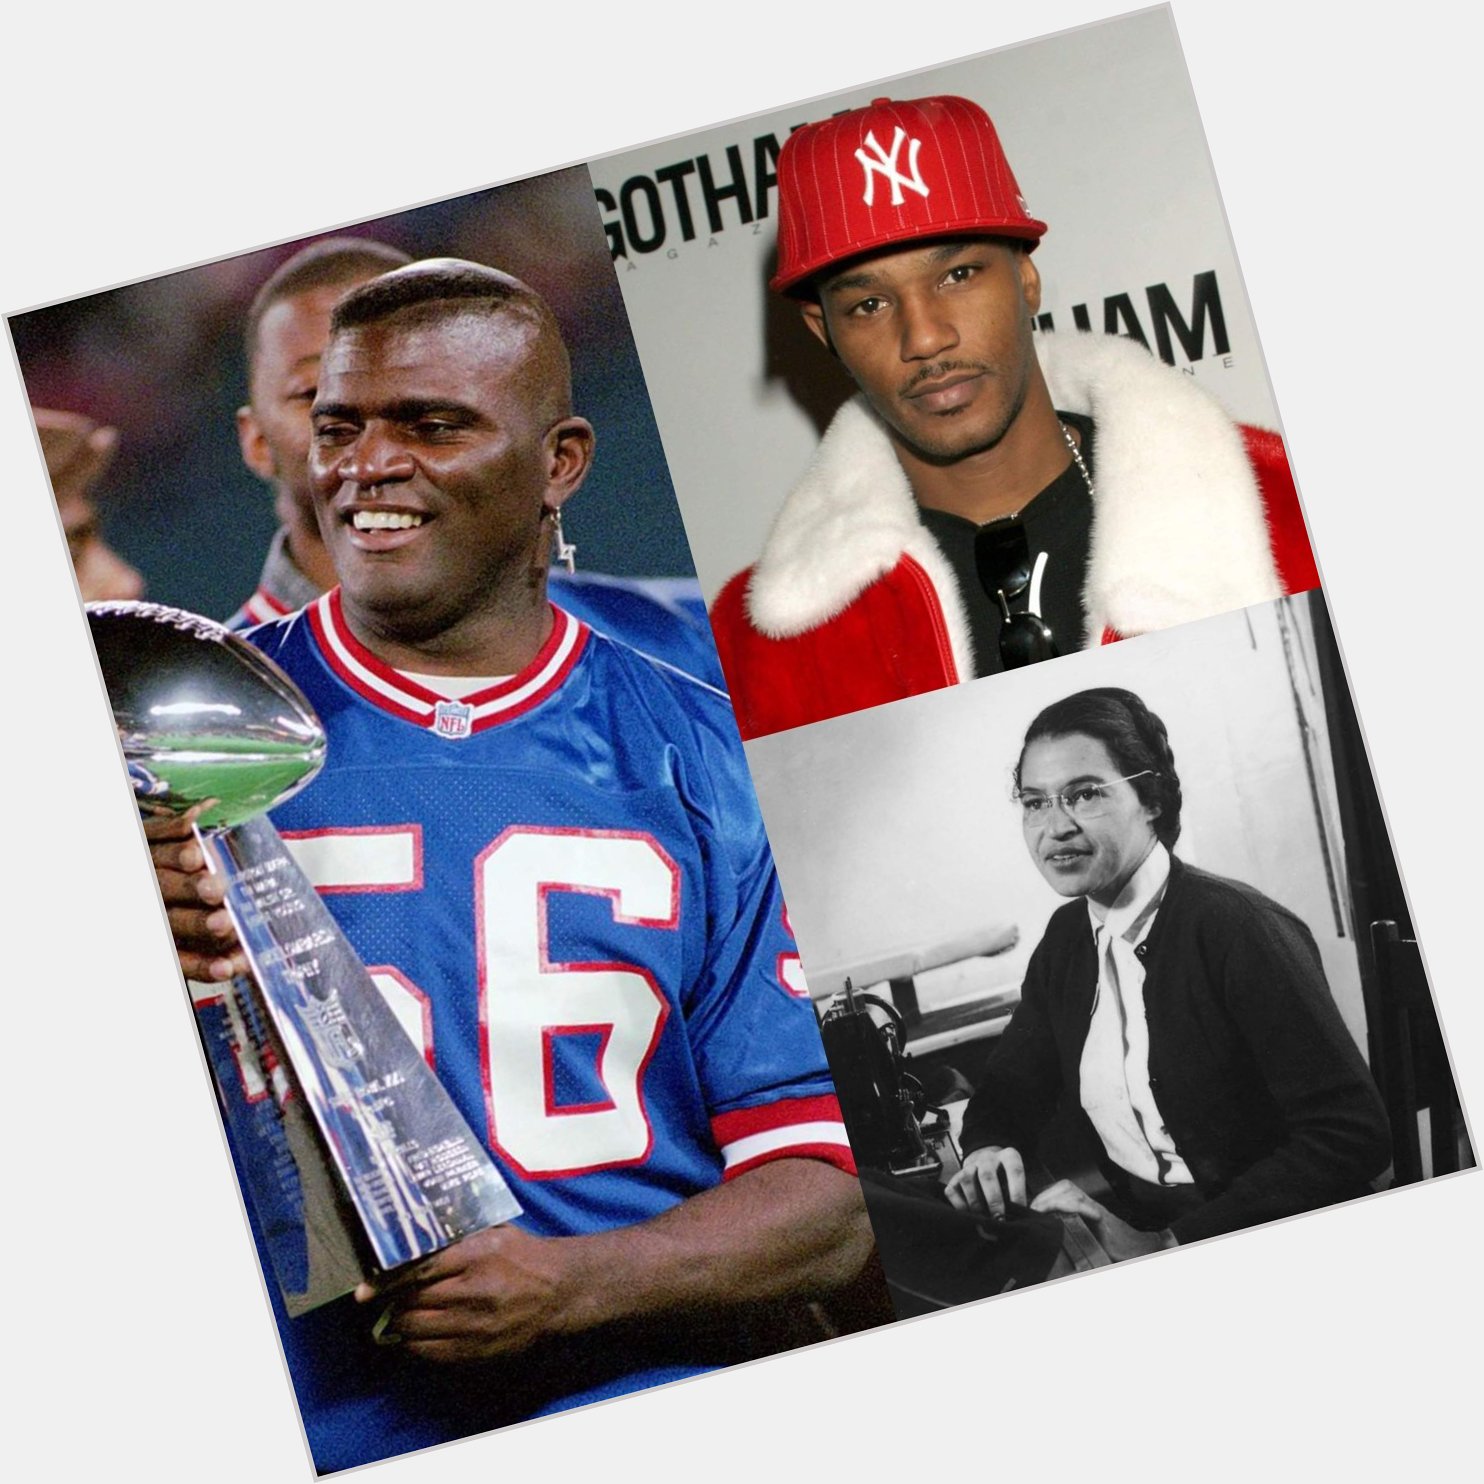 HAPPY BIRTHDAY LAWRENCE TAYLOR, CAM\RON & ROSA PARKS (REST IN HEAVEN ROSA). 